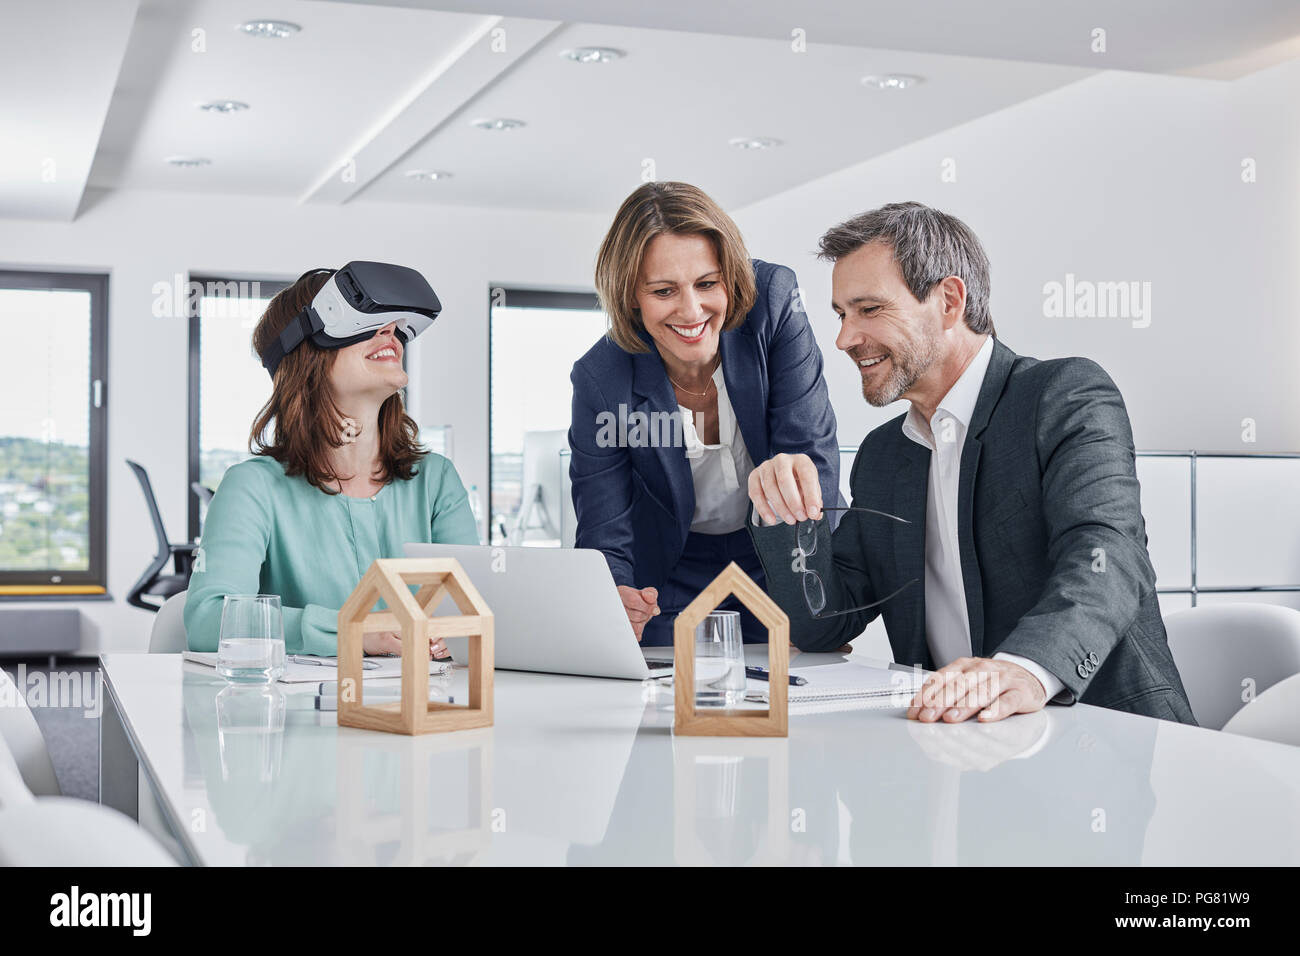 Business people having a meeting in office with VR glasses, laptop and architectural models Stock Photo